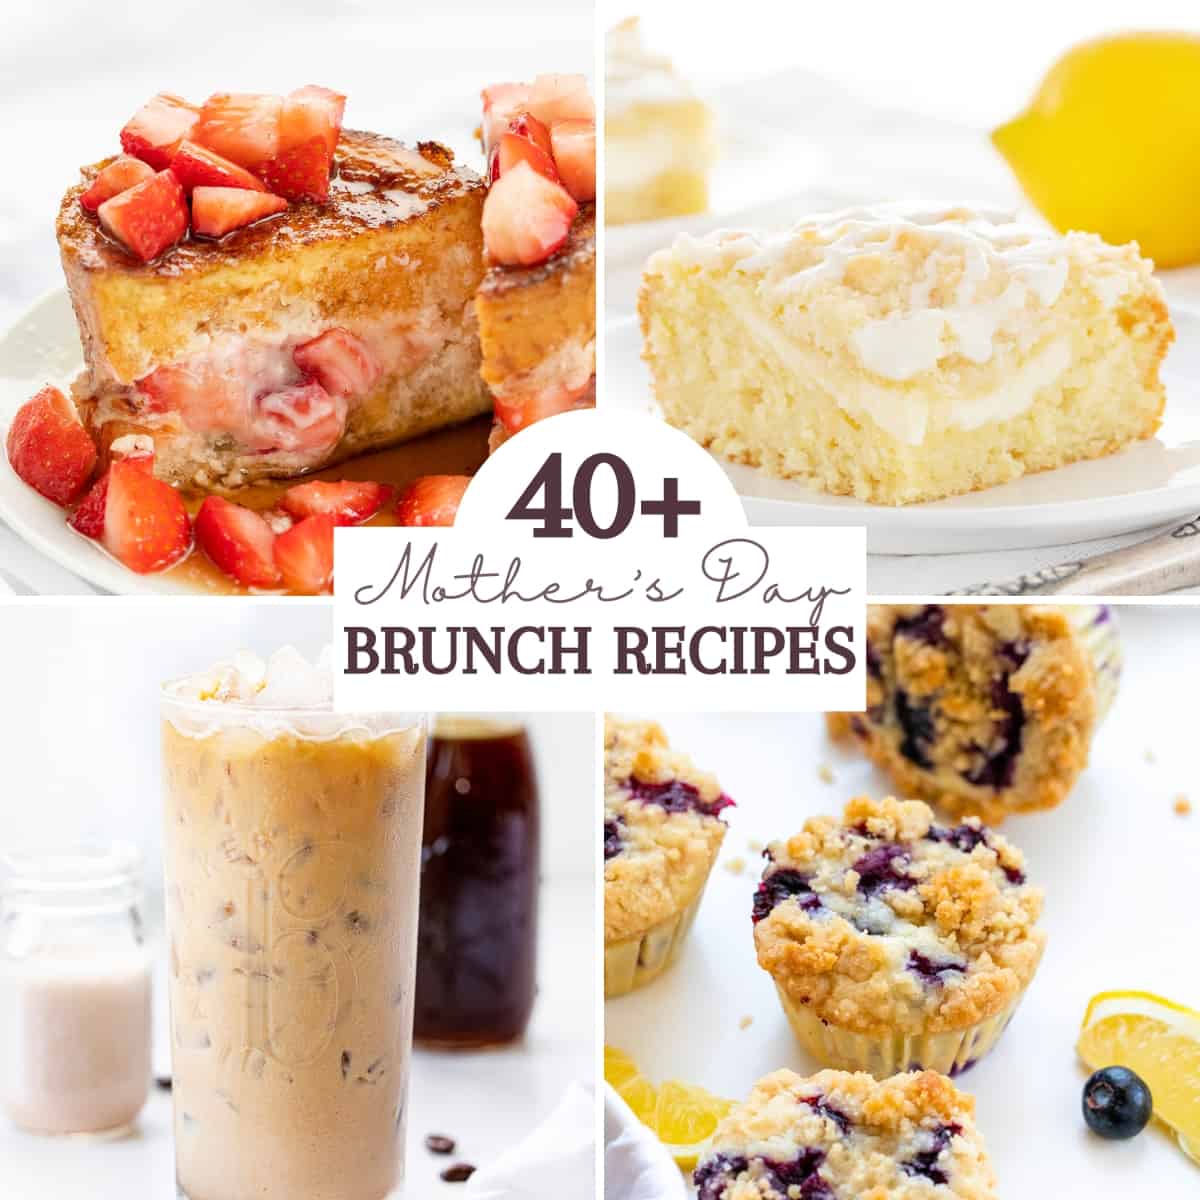 Images of Stuffed French Toast, Lemon Cream Cheese Cake, Cold Brew, and Blueberry Muffins with the Words 40+ Mother's Day Brunch Recipes. 